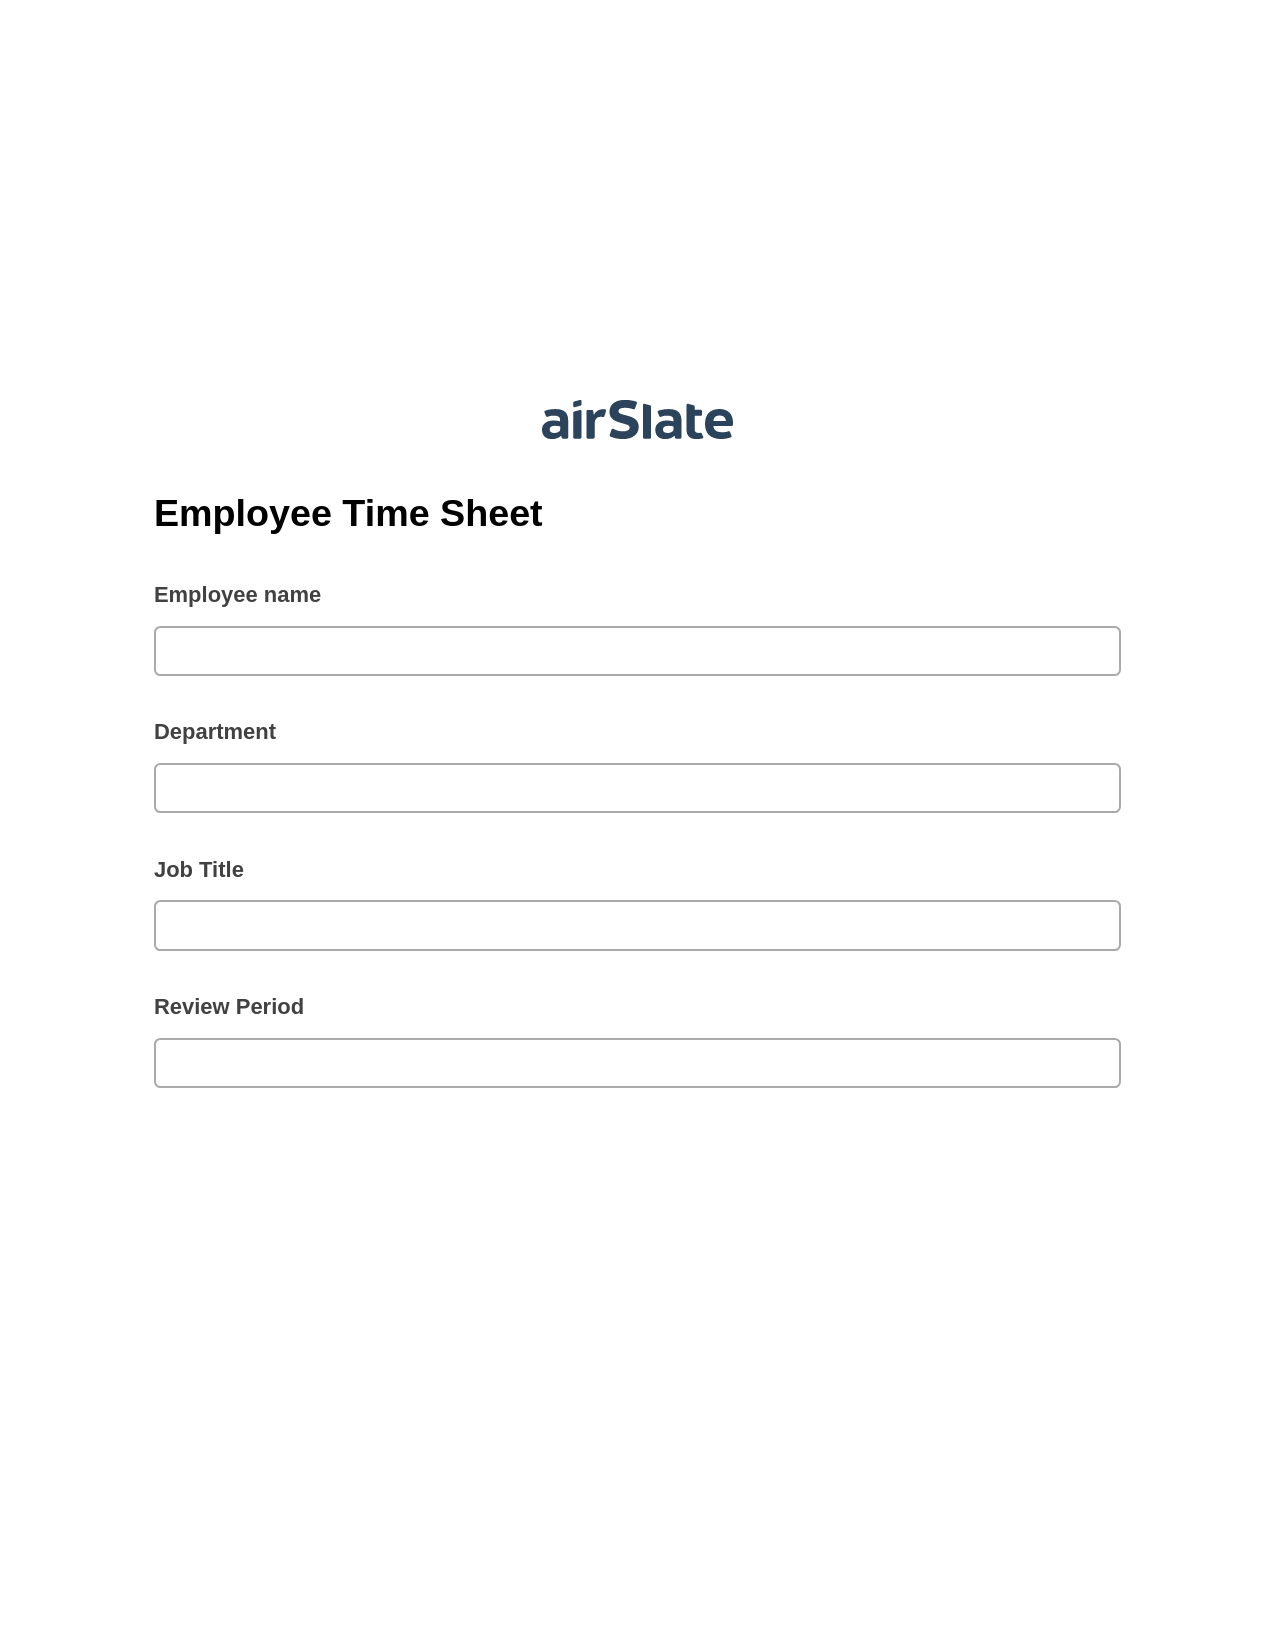 Employee Time Sheet Prefill from NetSuite records, Update Audit Trail Bot, Archive to Box Bot